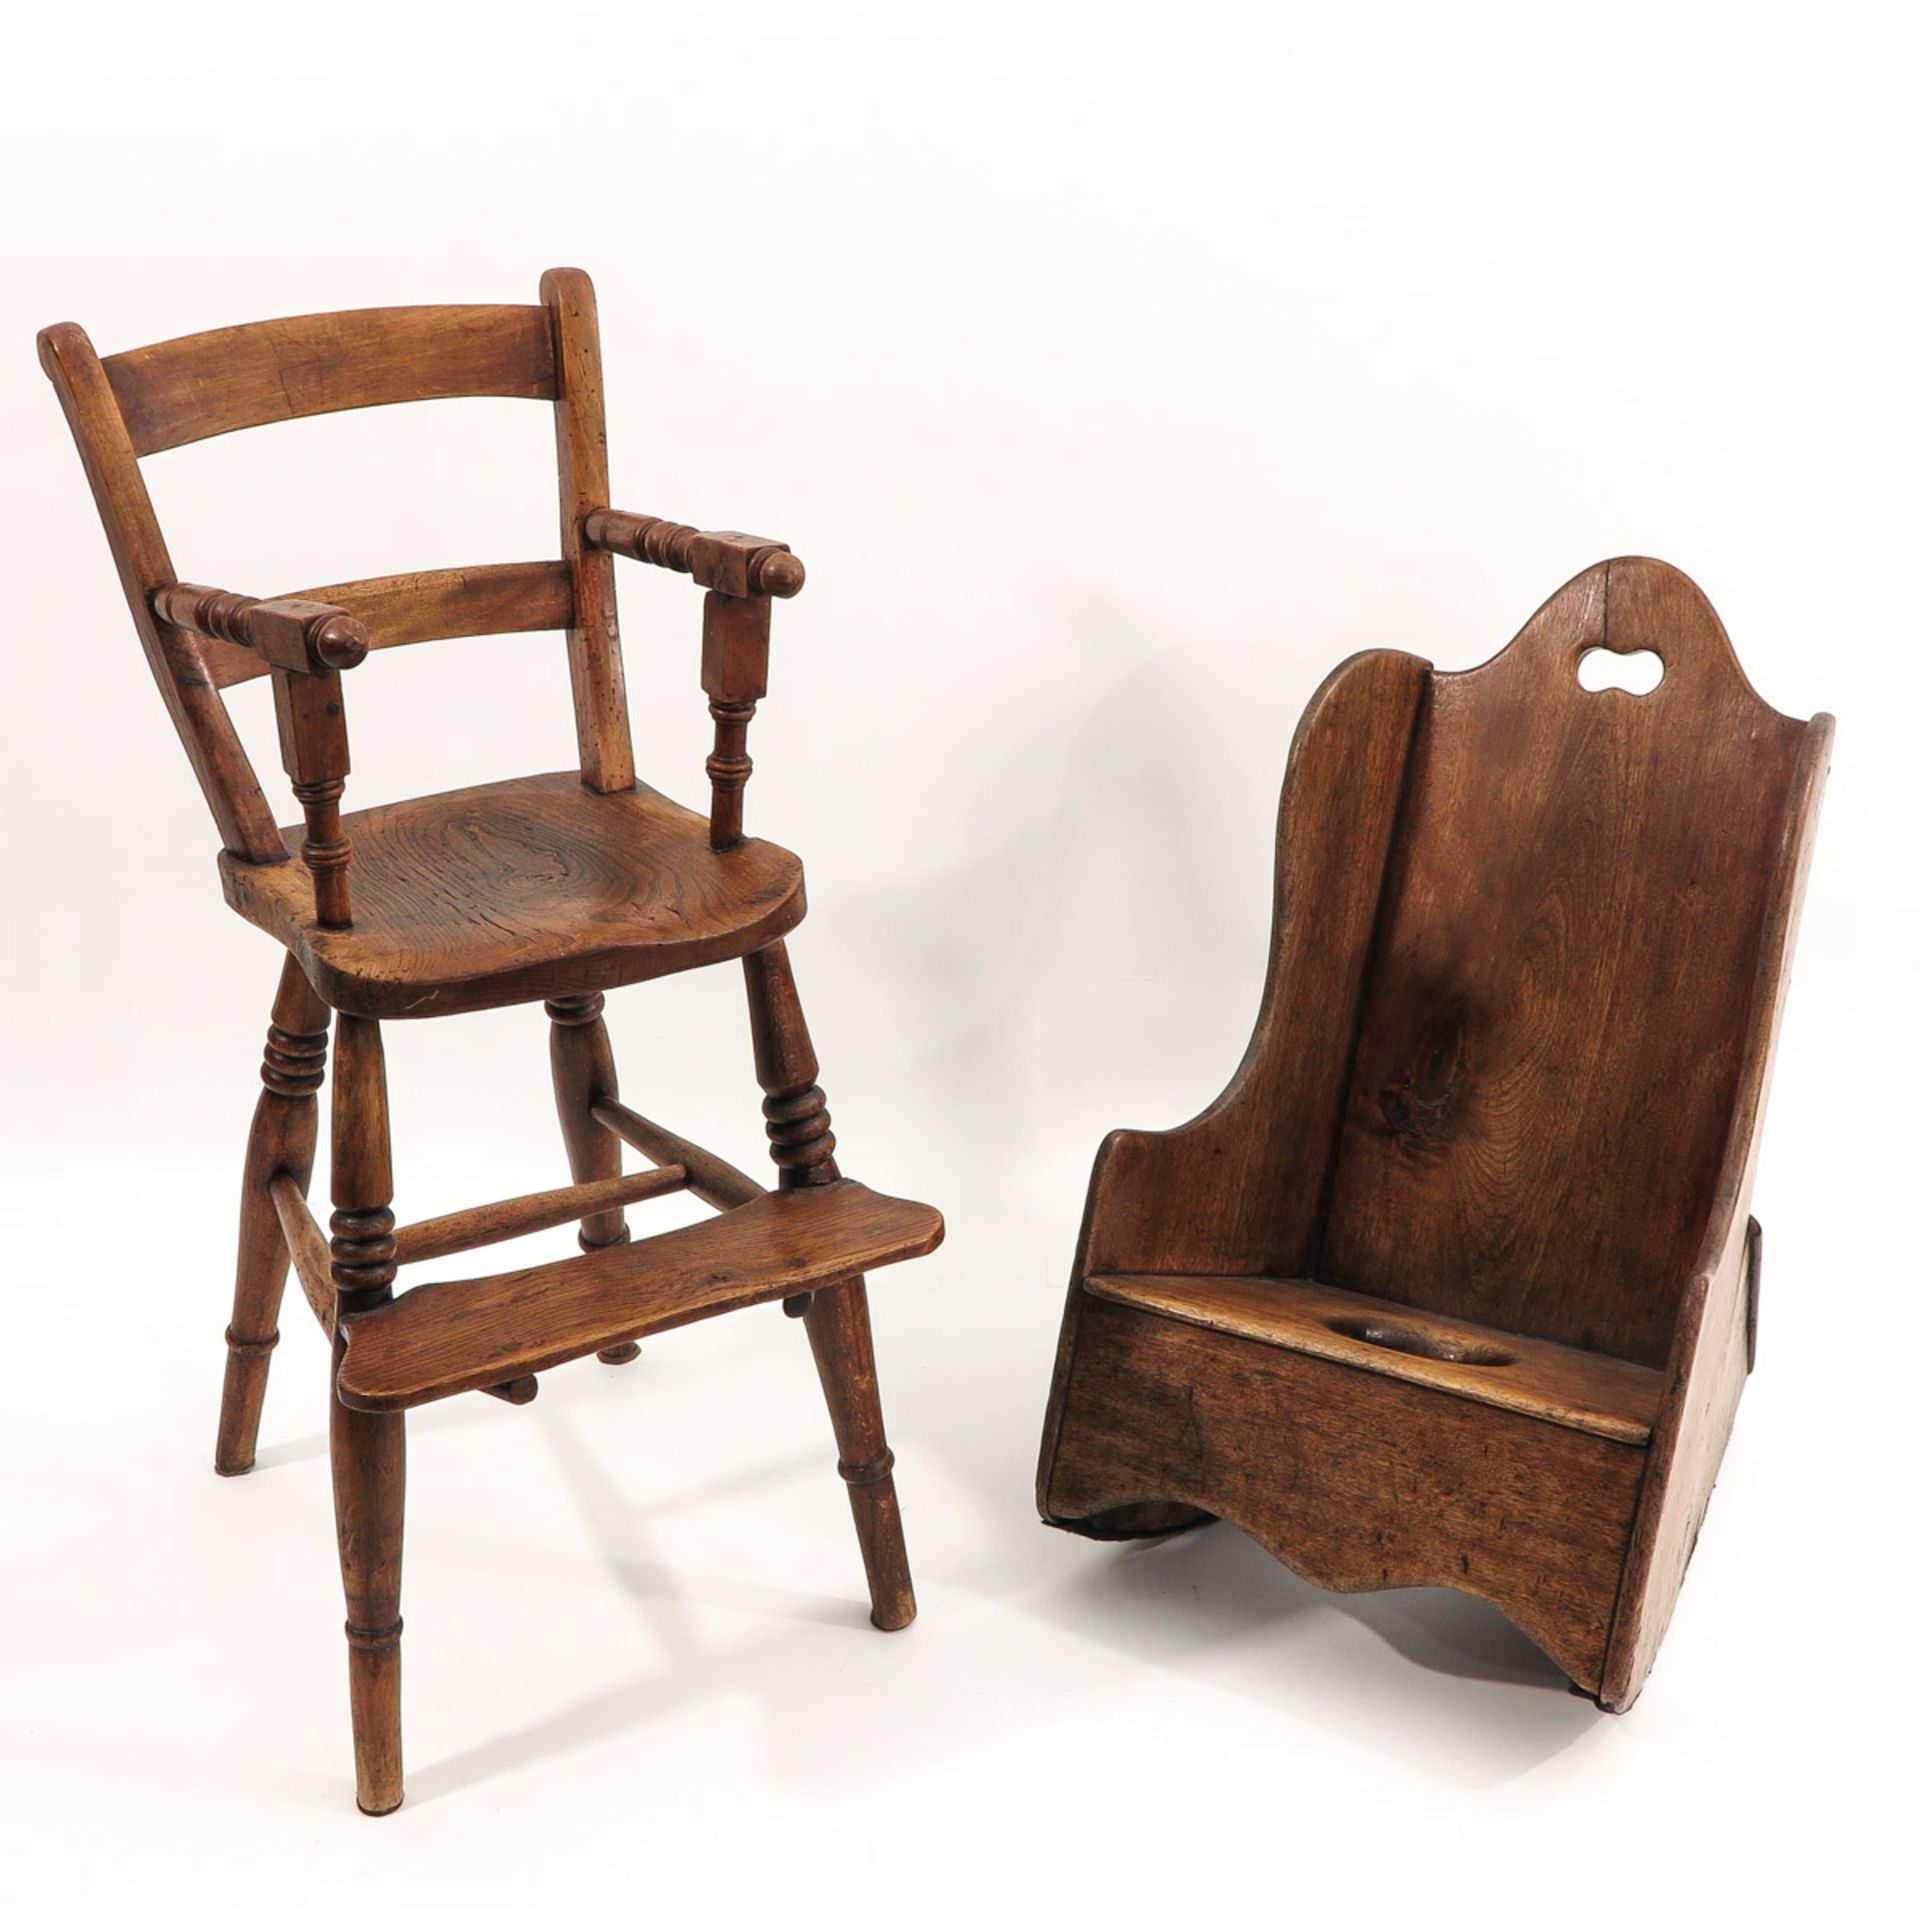 An Antique High Chair and Potty Chair